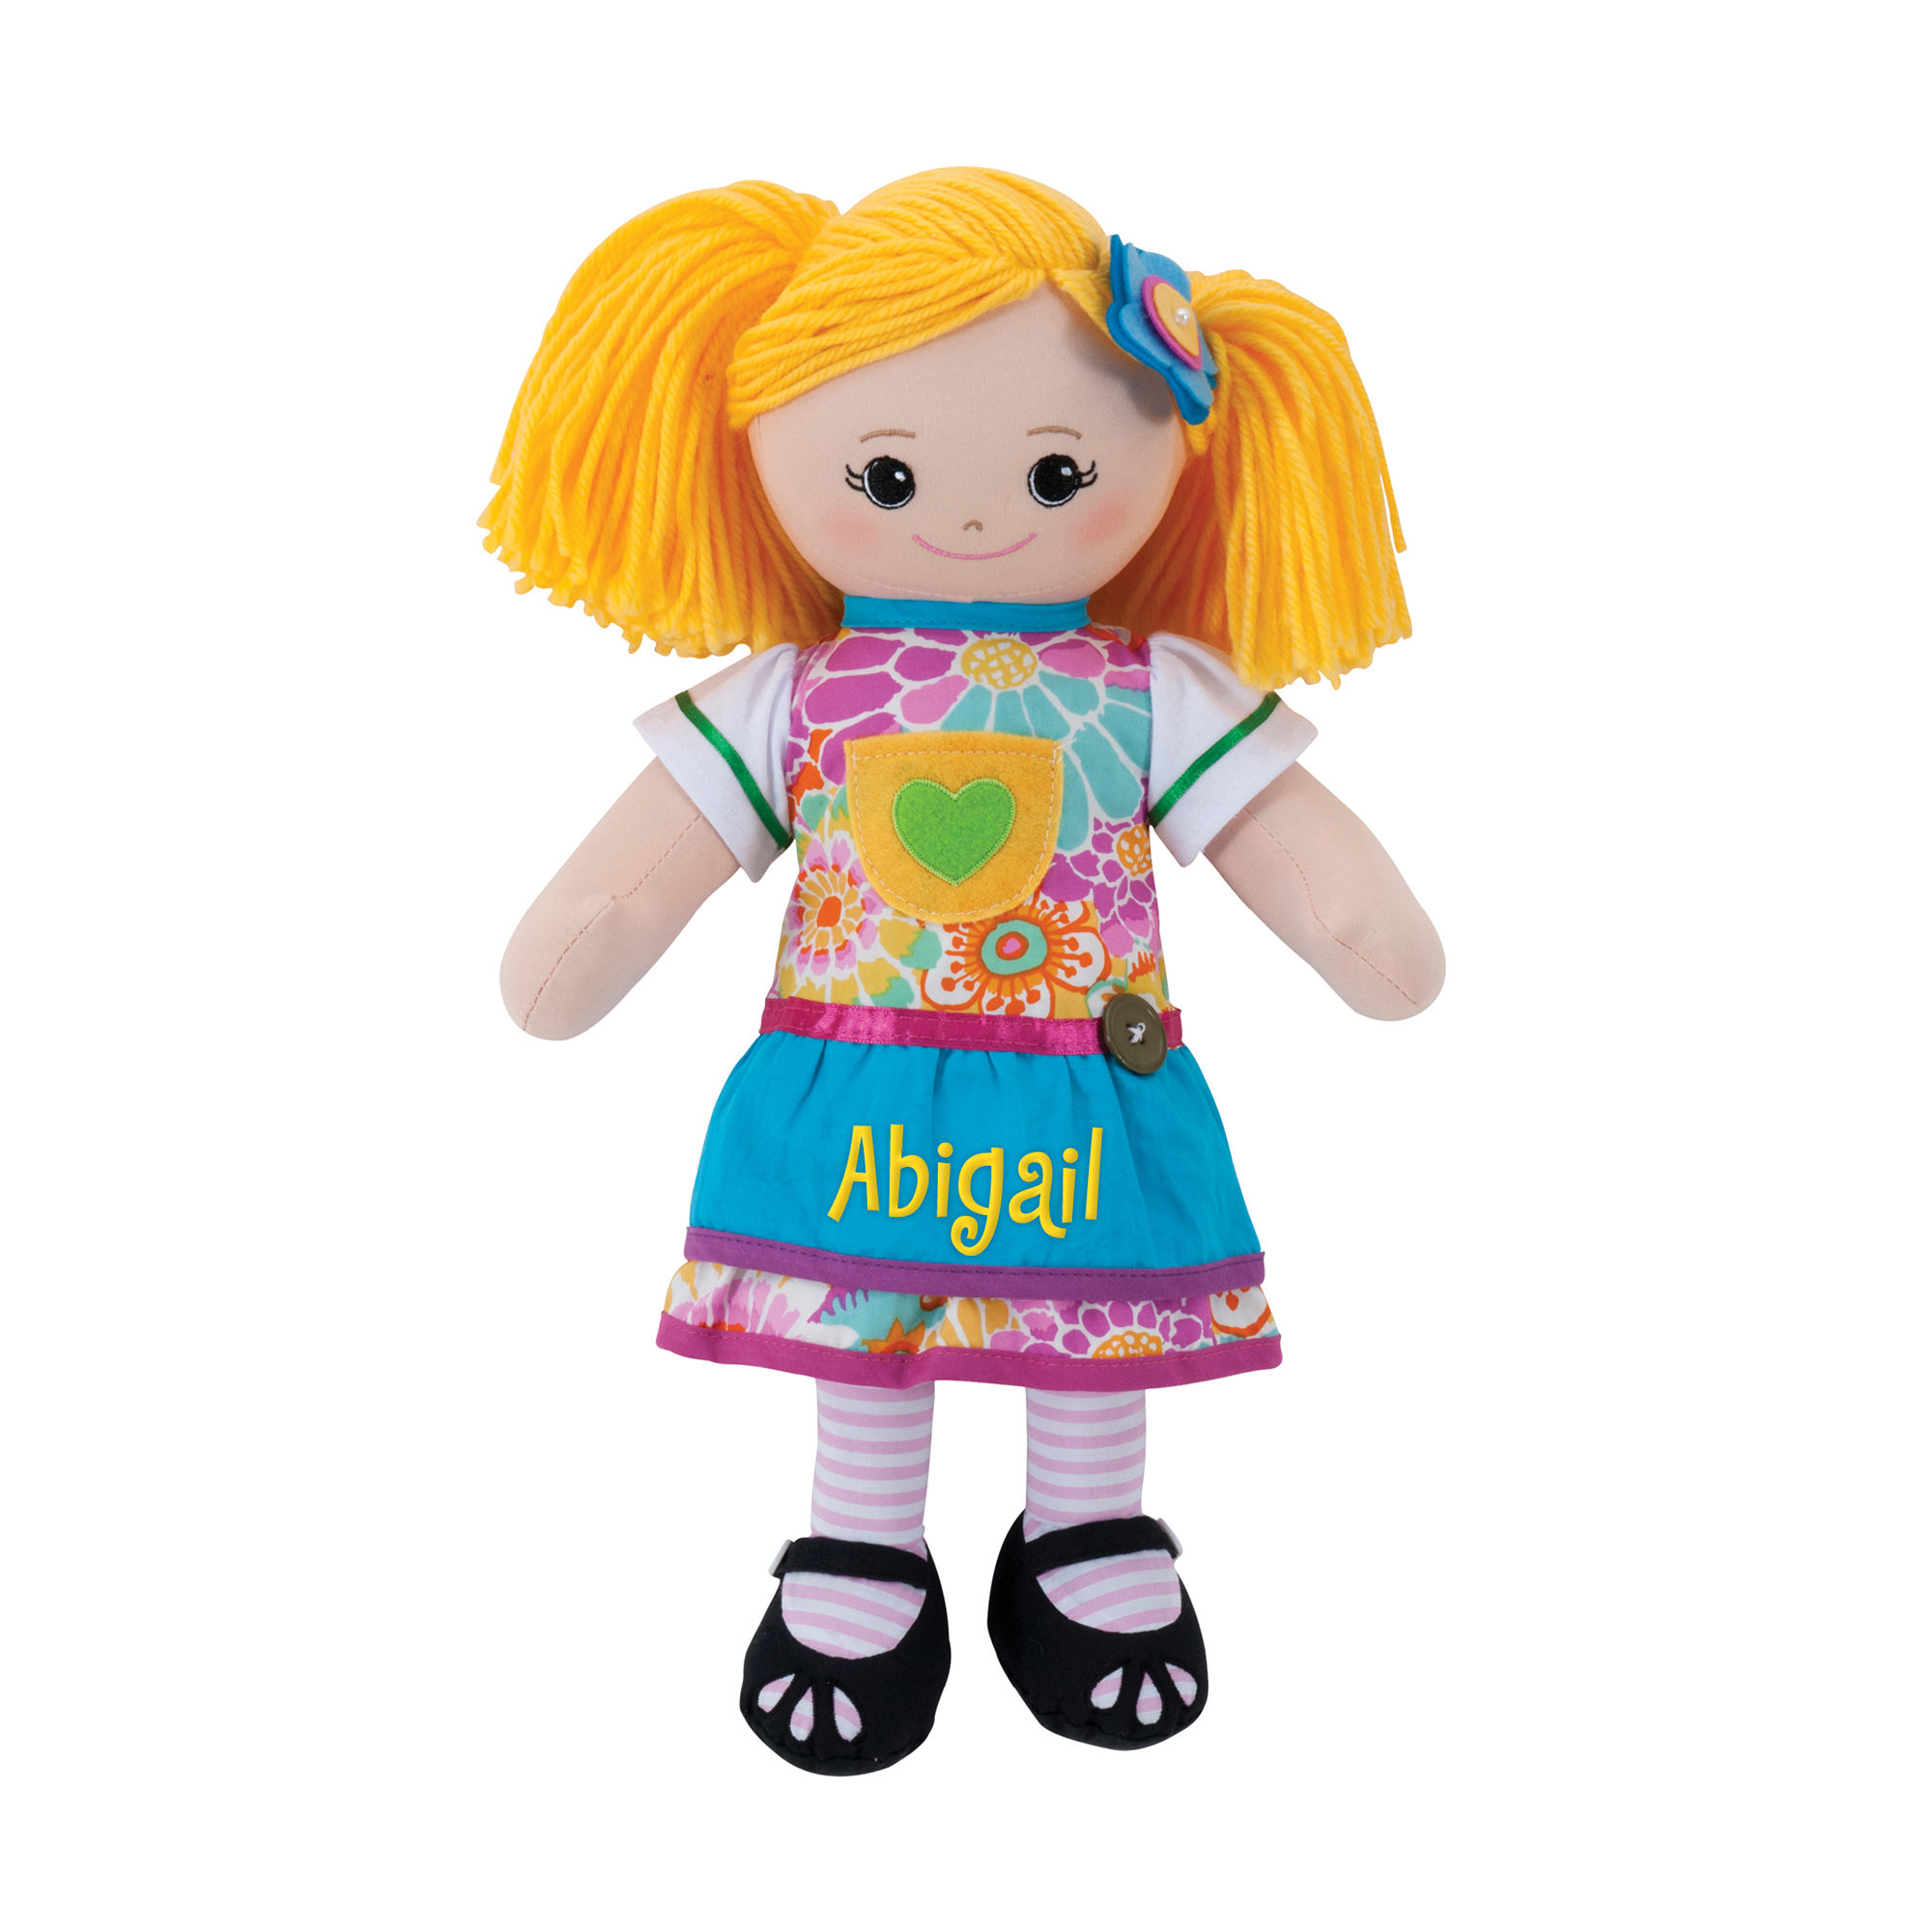 Personalized Blonde Doll with Blue Apron Dress and Hair Clip